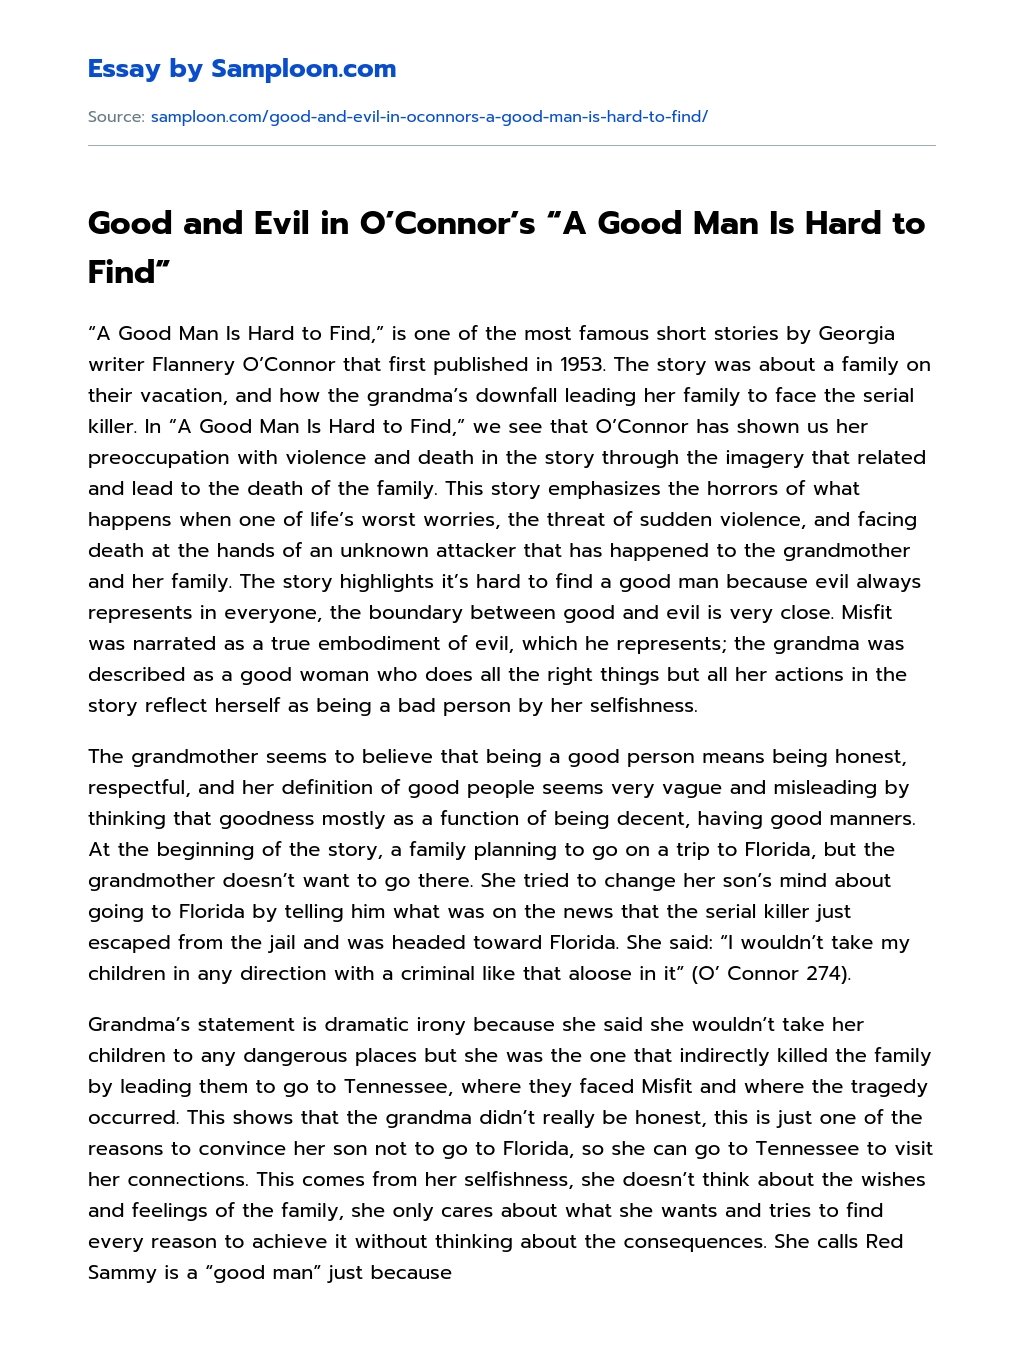 Good and Evil in O’Connor’s “A Good Man Is Hard to Find” essay